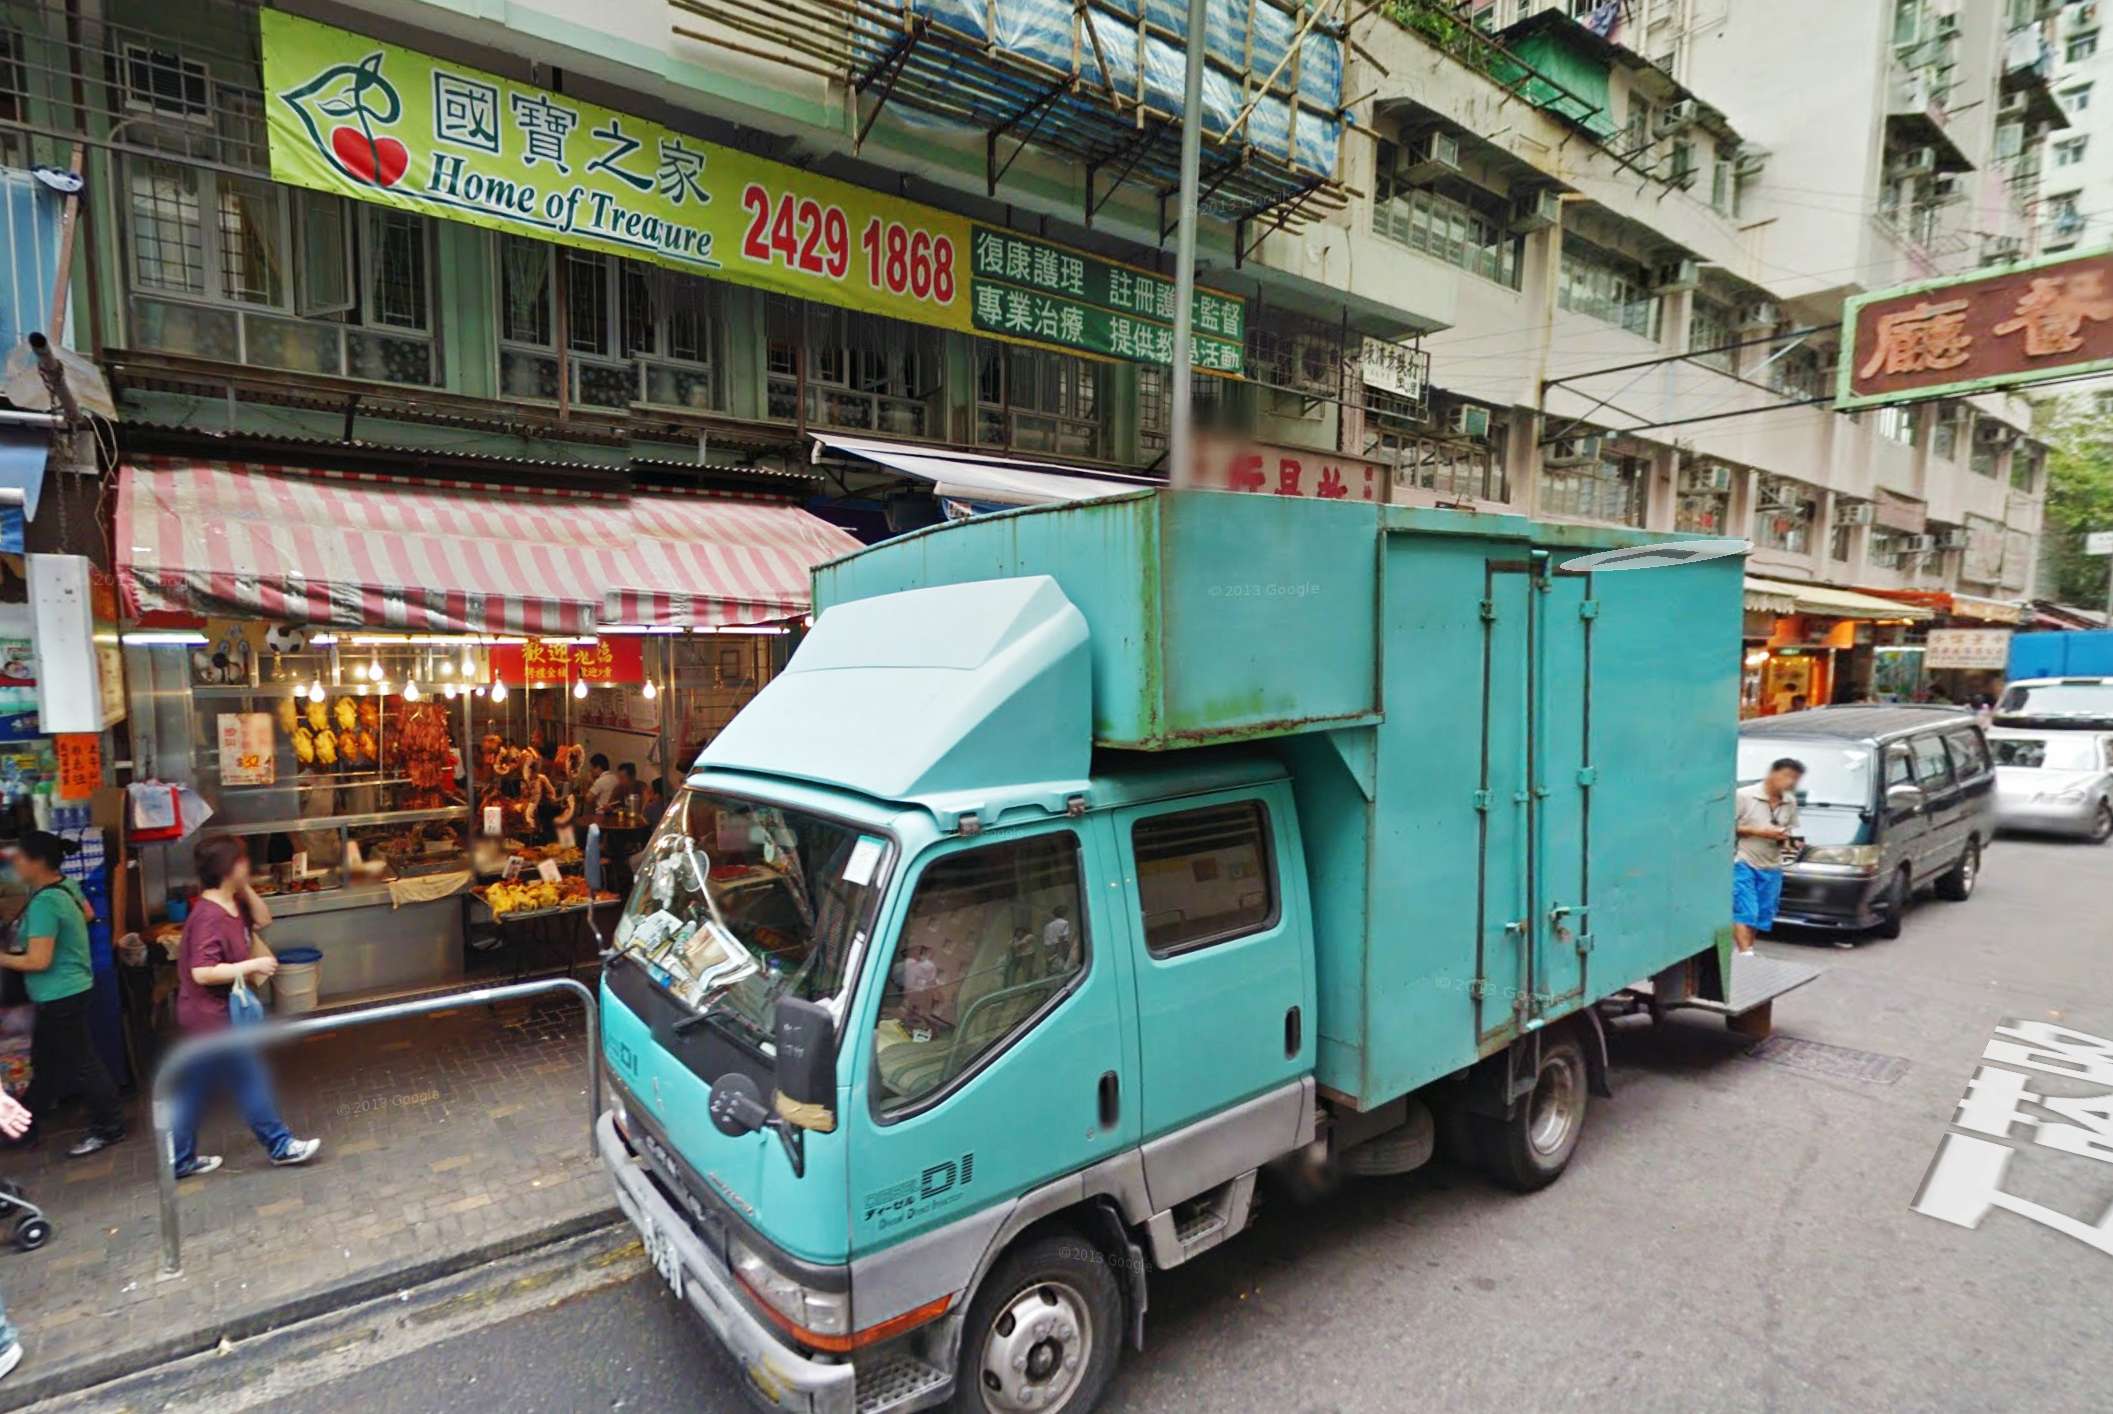 The home is located in Kwai Chung in the New Territories. Photo: SCMP Pictures